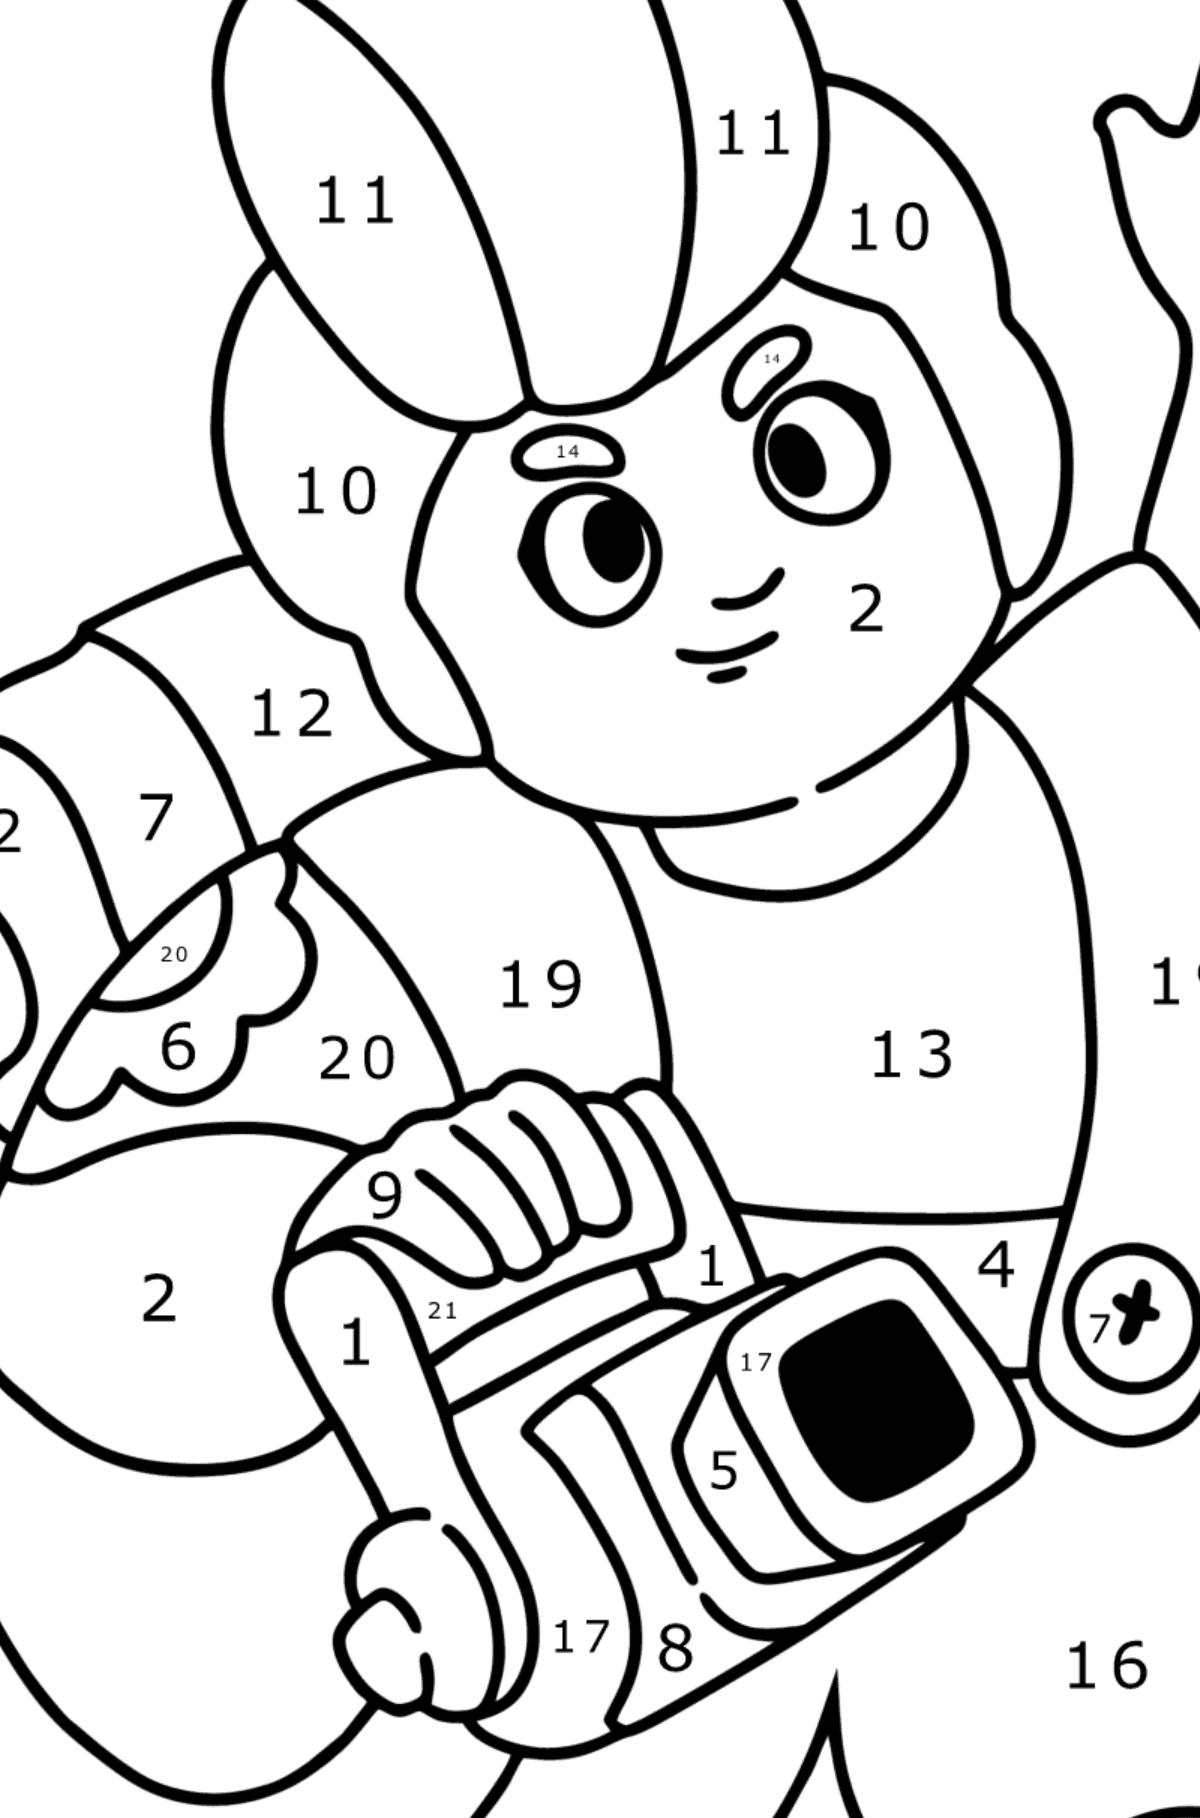 Brawl Stars Pam coloring page - Coloring by Numbers for Kids